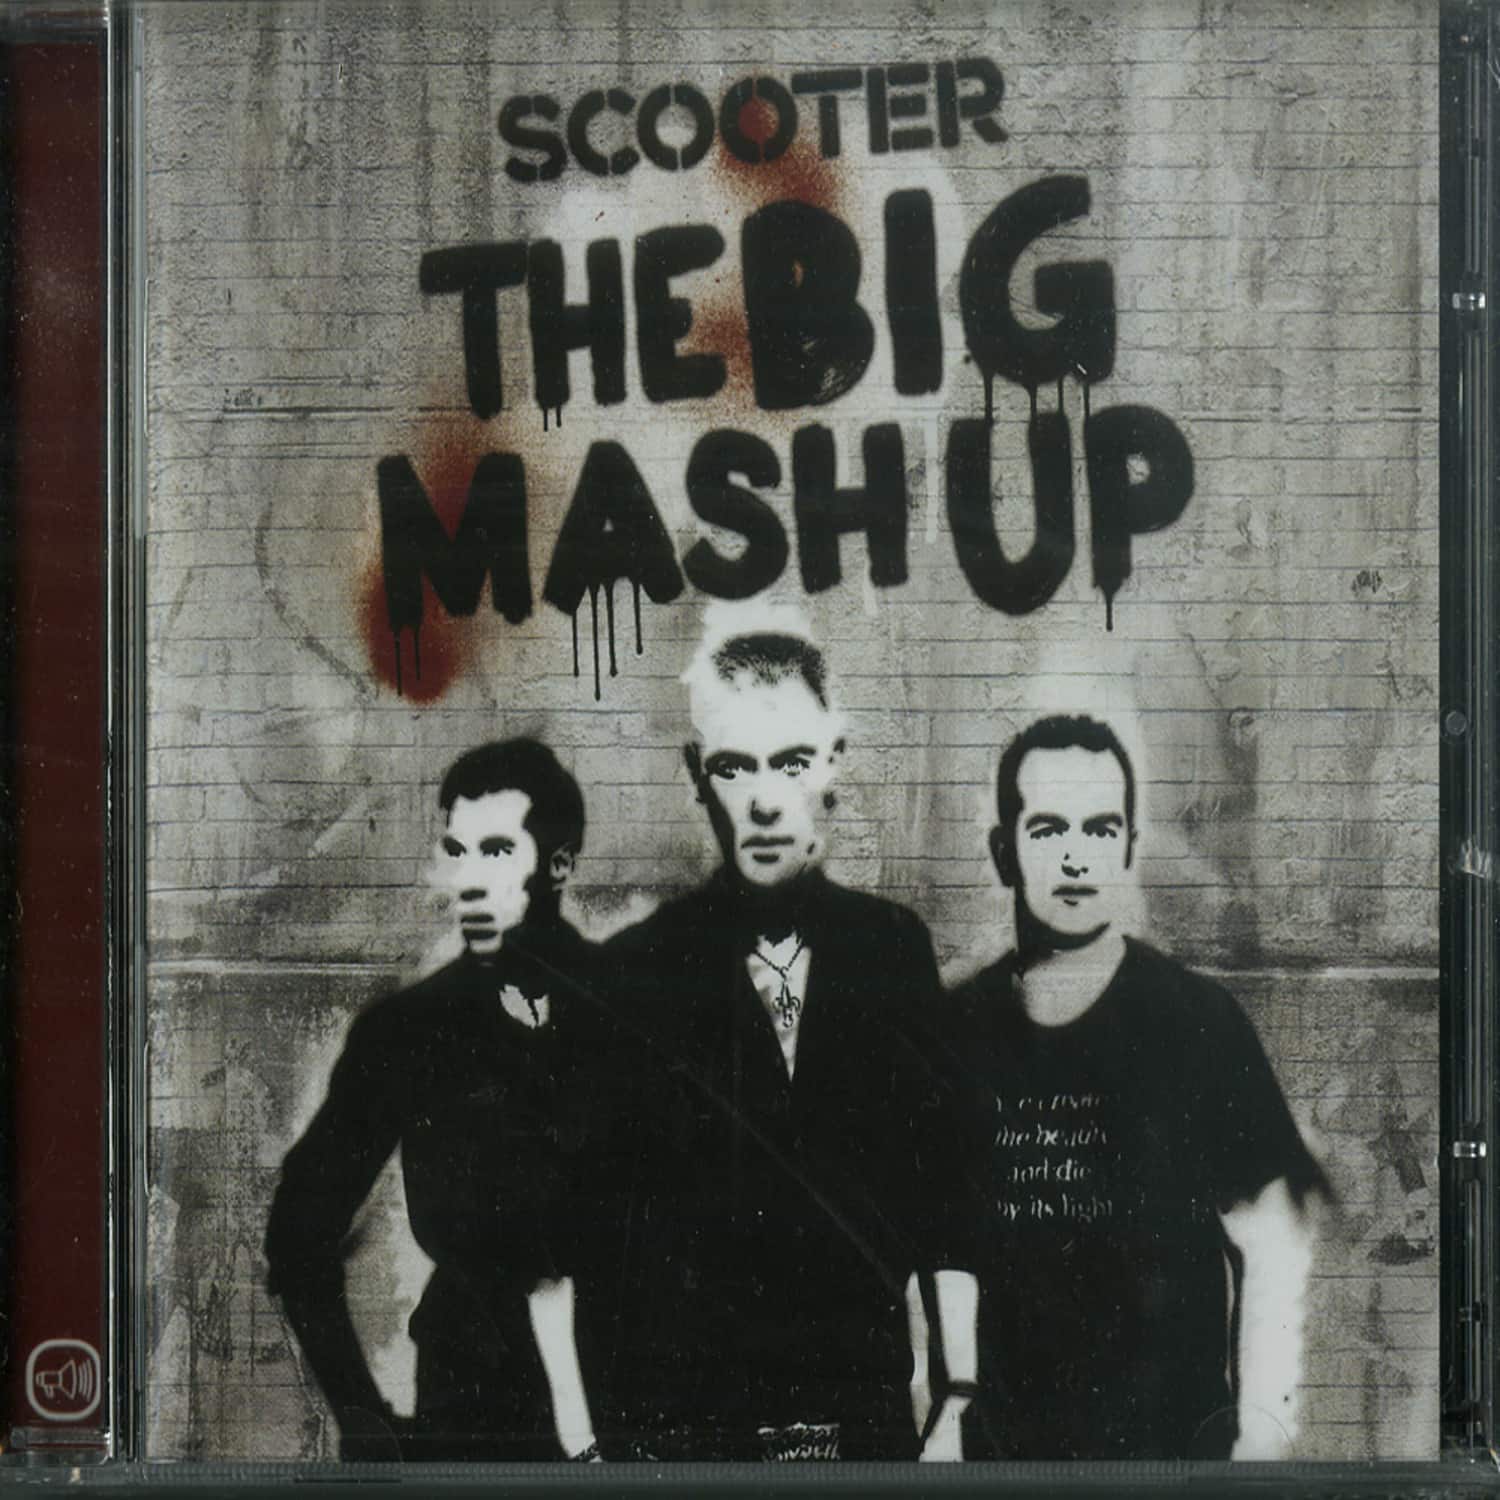 Scooter - THE BIG MASH UP 